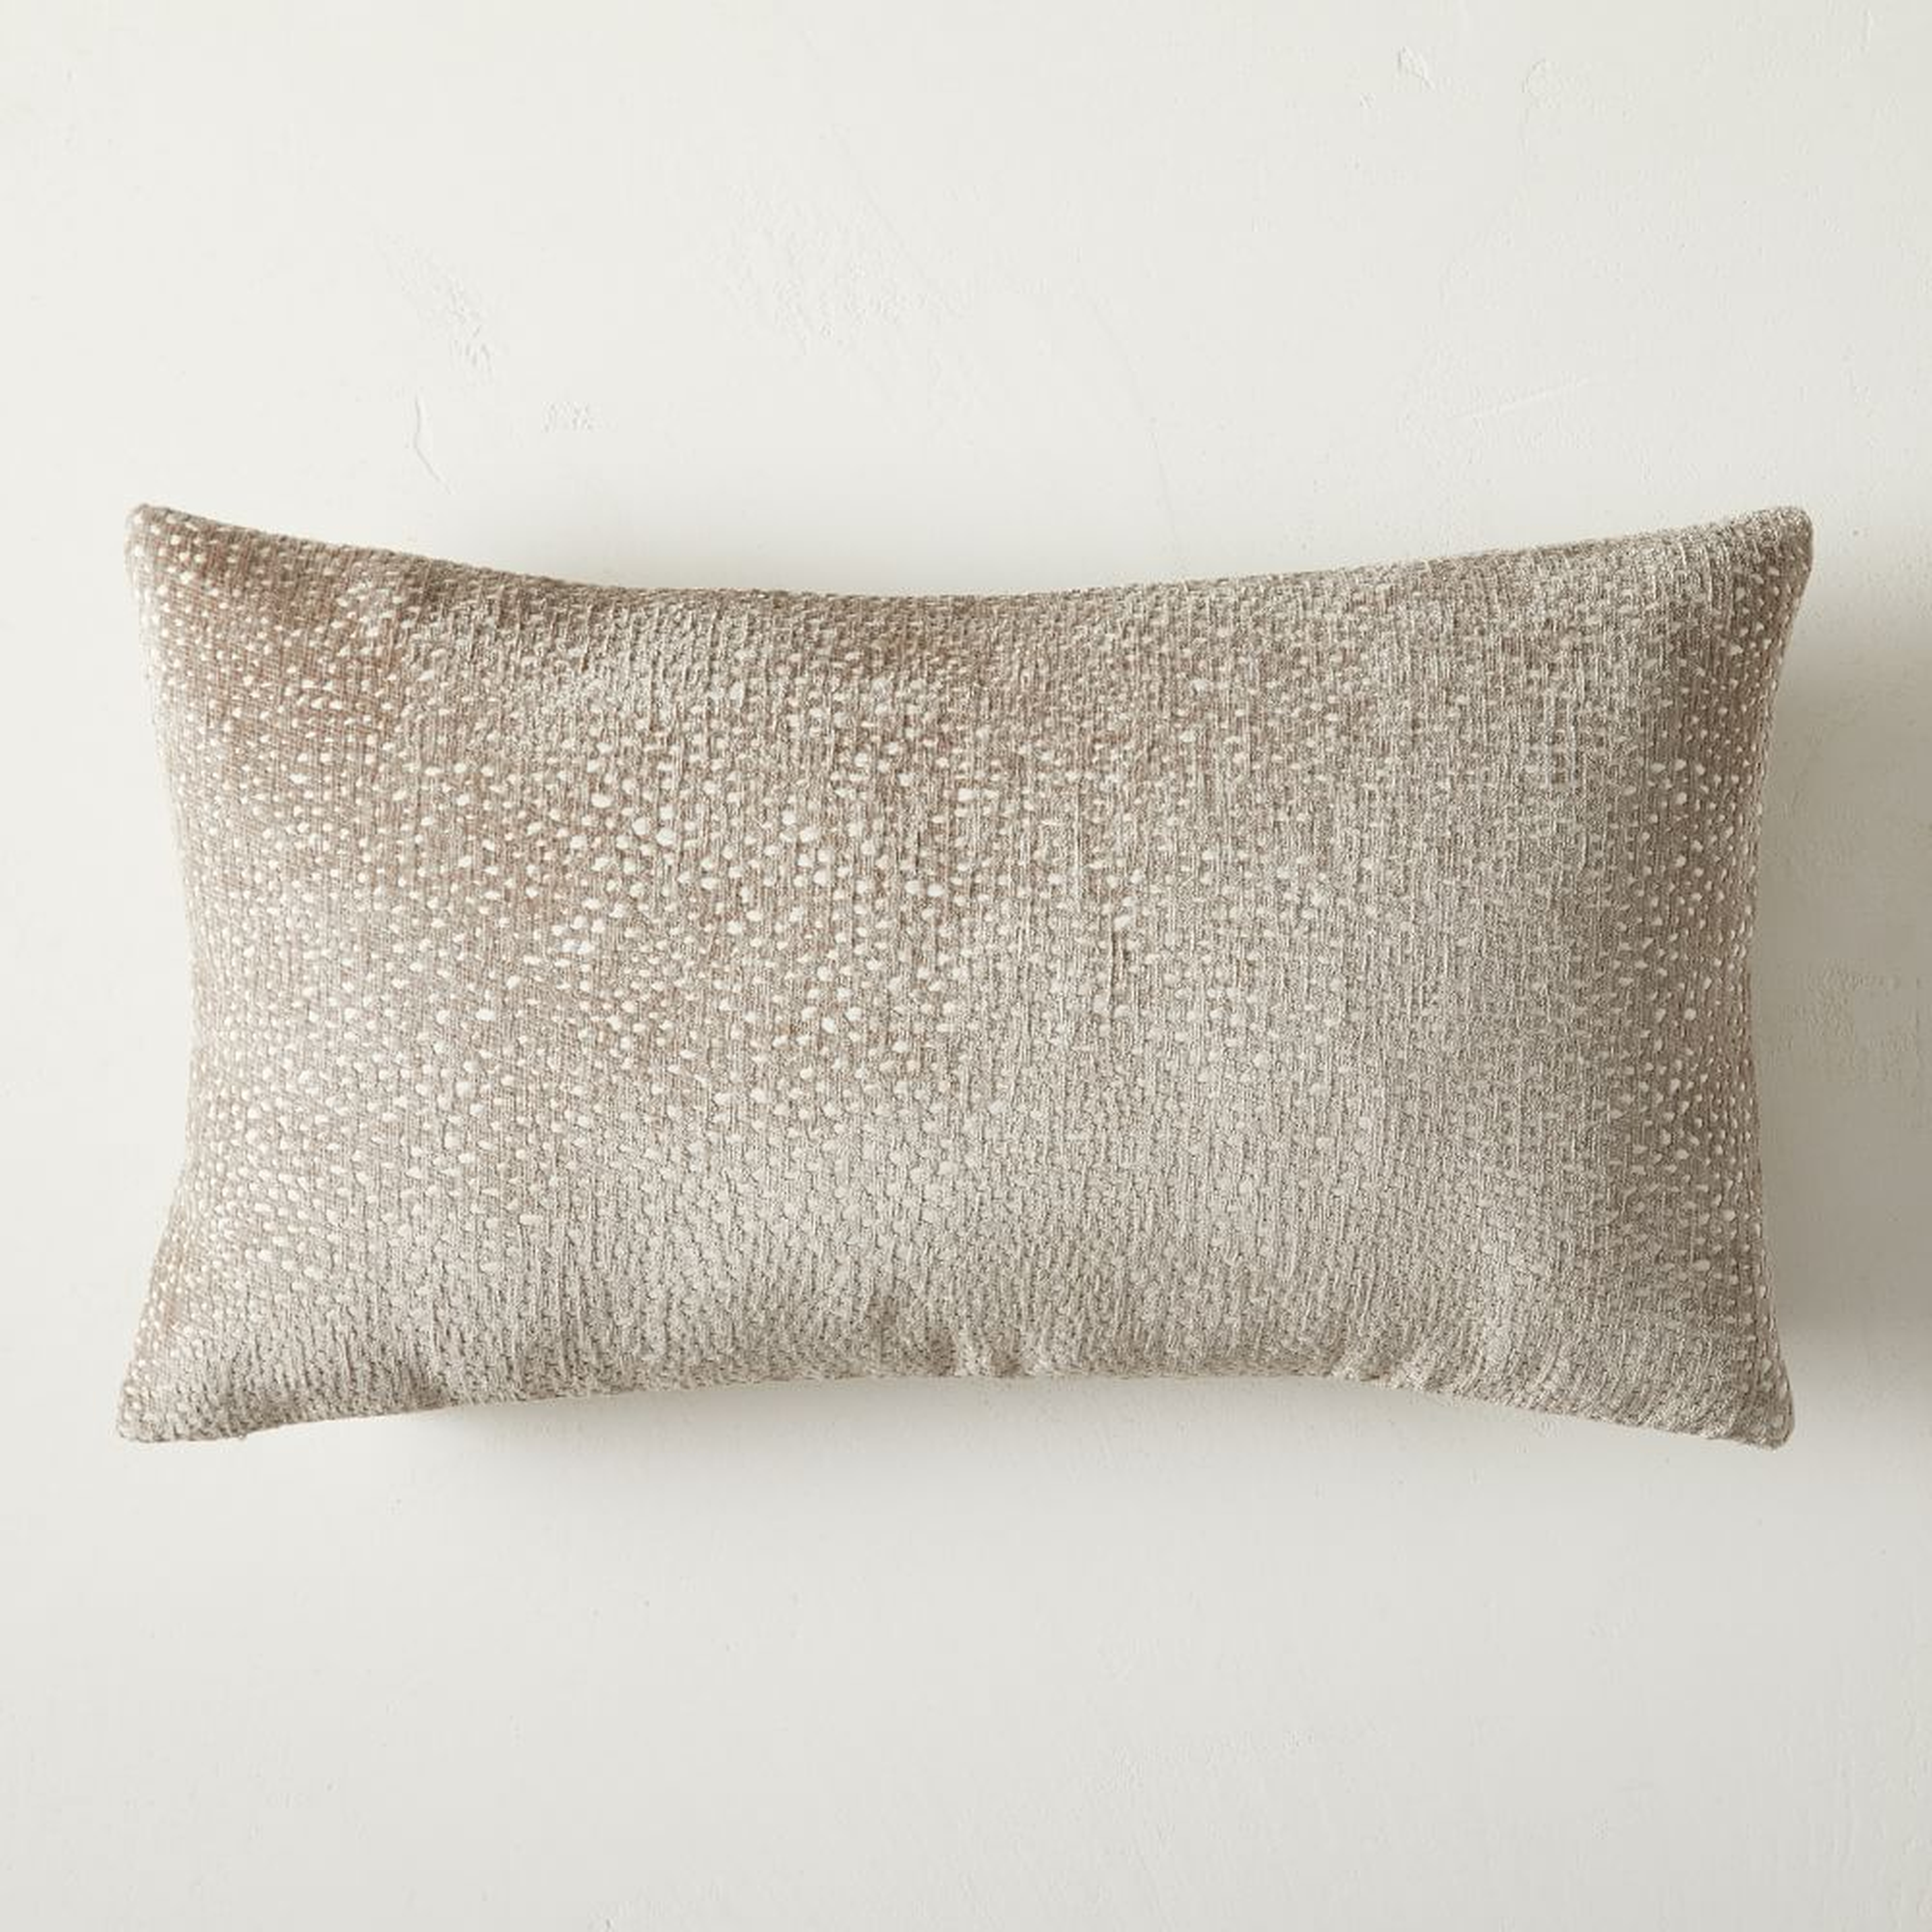 Dotted Chenille Jacquard Pillow Cover, 12"x21", Dark Tan - West Elm